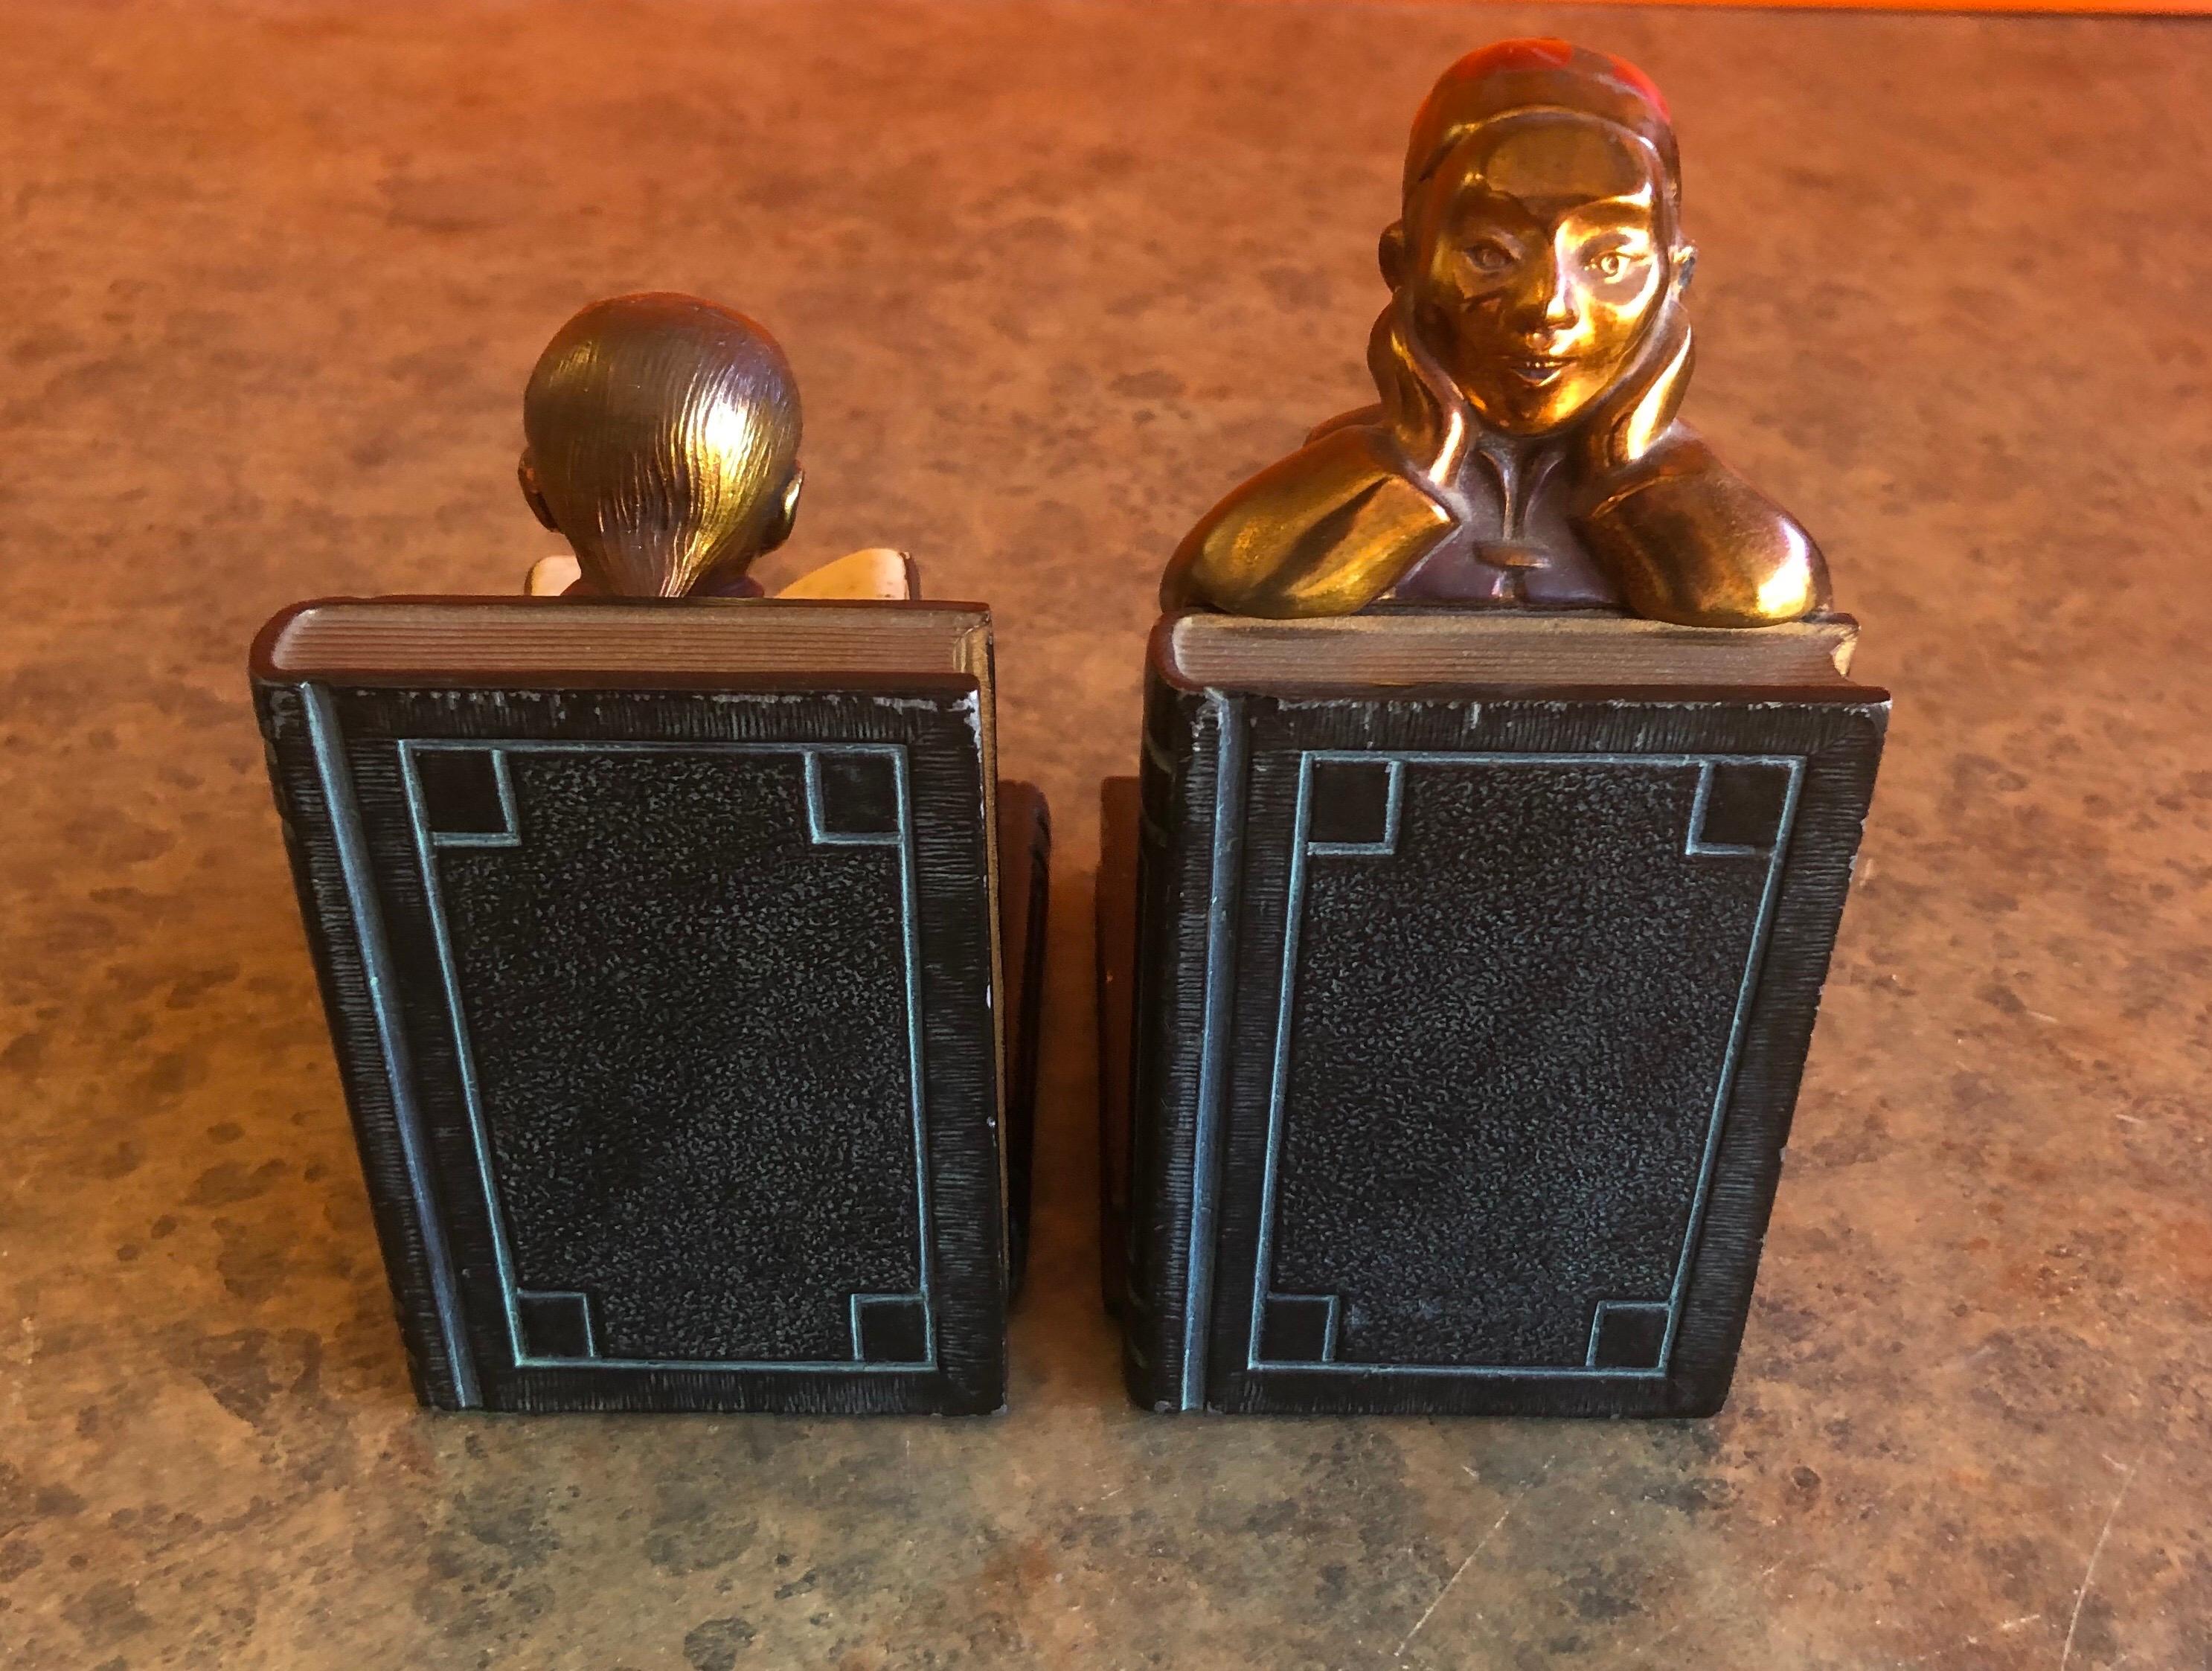 20th Century Pair of Metal Clad Art Deco Bookends by Ronson Art Metal Works